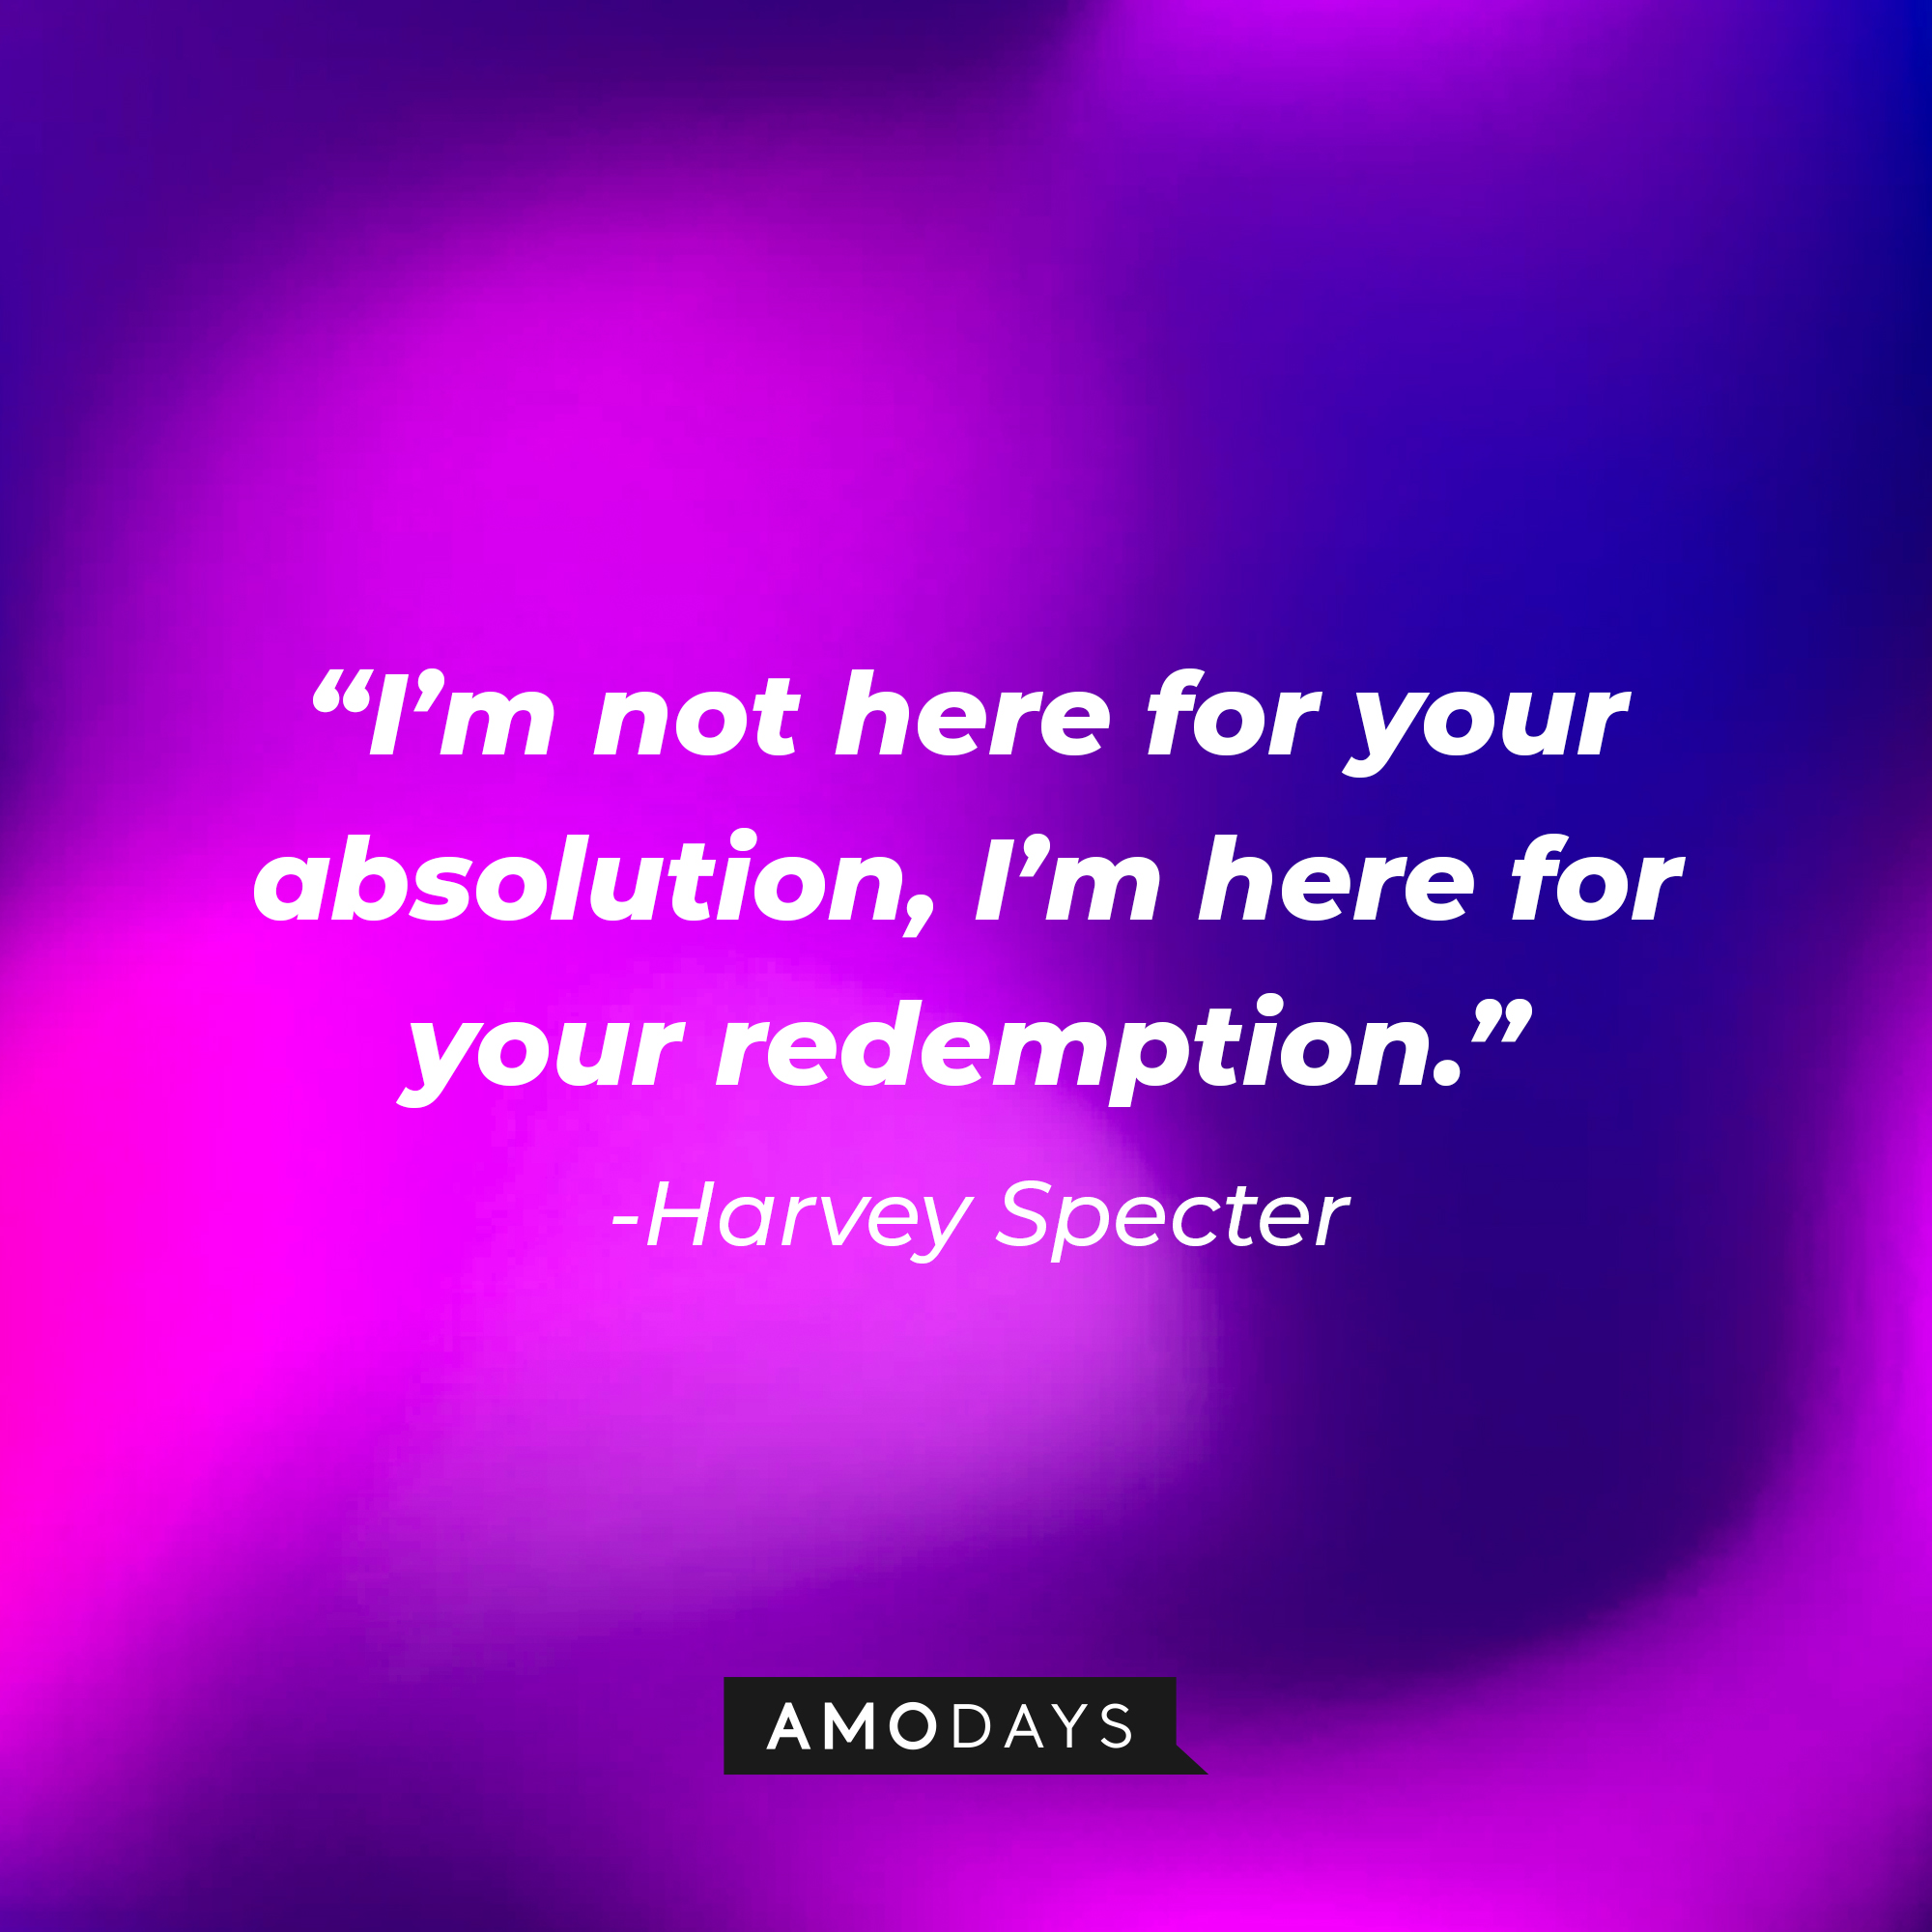 Harvey Specter's quote from "Suits" : "I'm not here for your absolution, I'm here for your redemption." | Source: Amodays